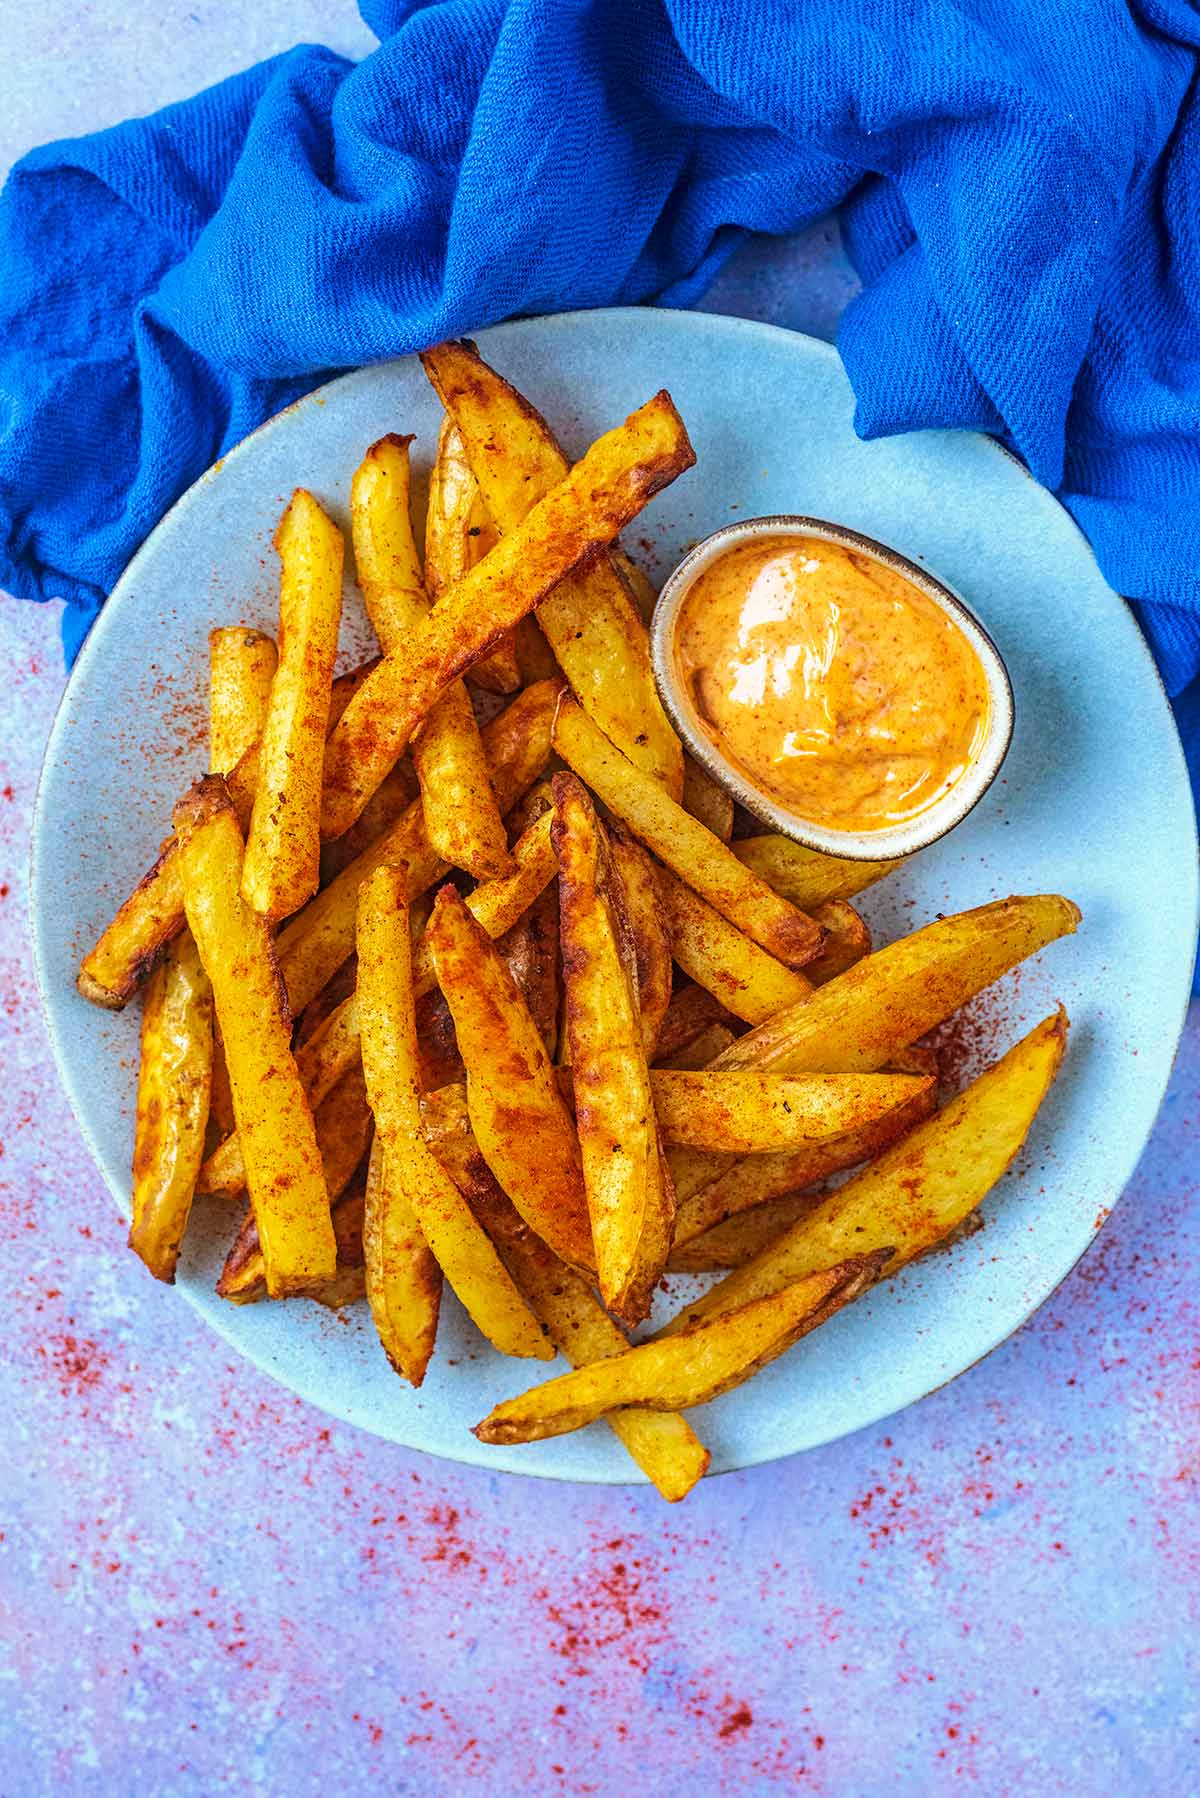 A plate of chips and a small bowl of dip on a round blue plate.